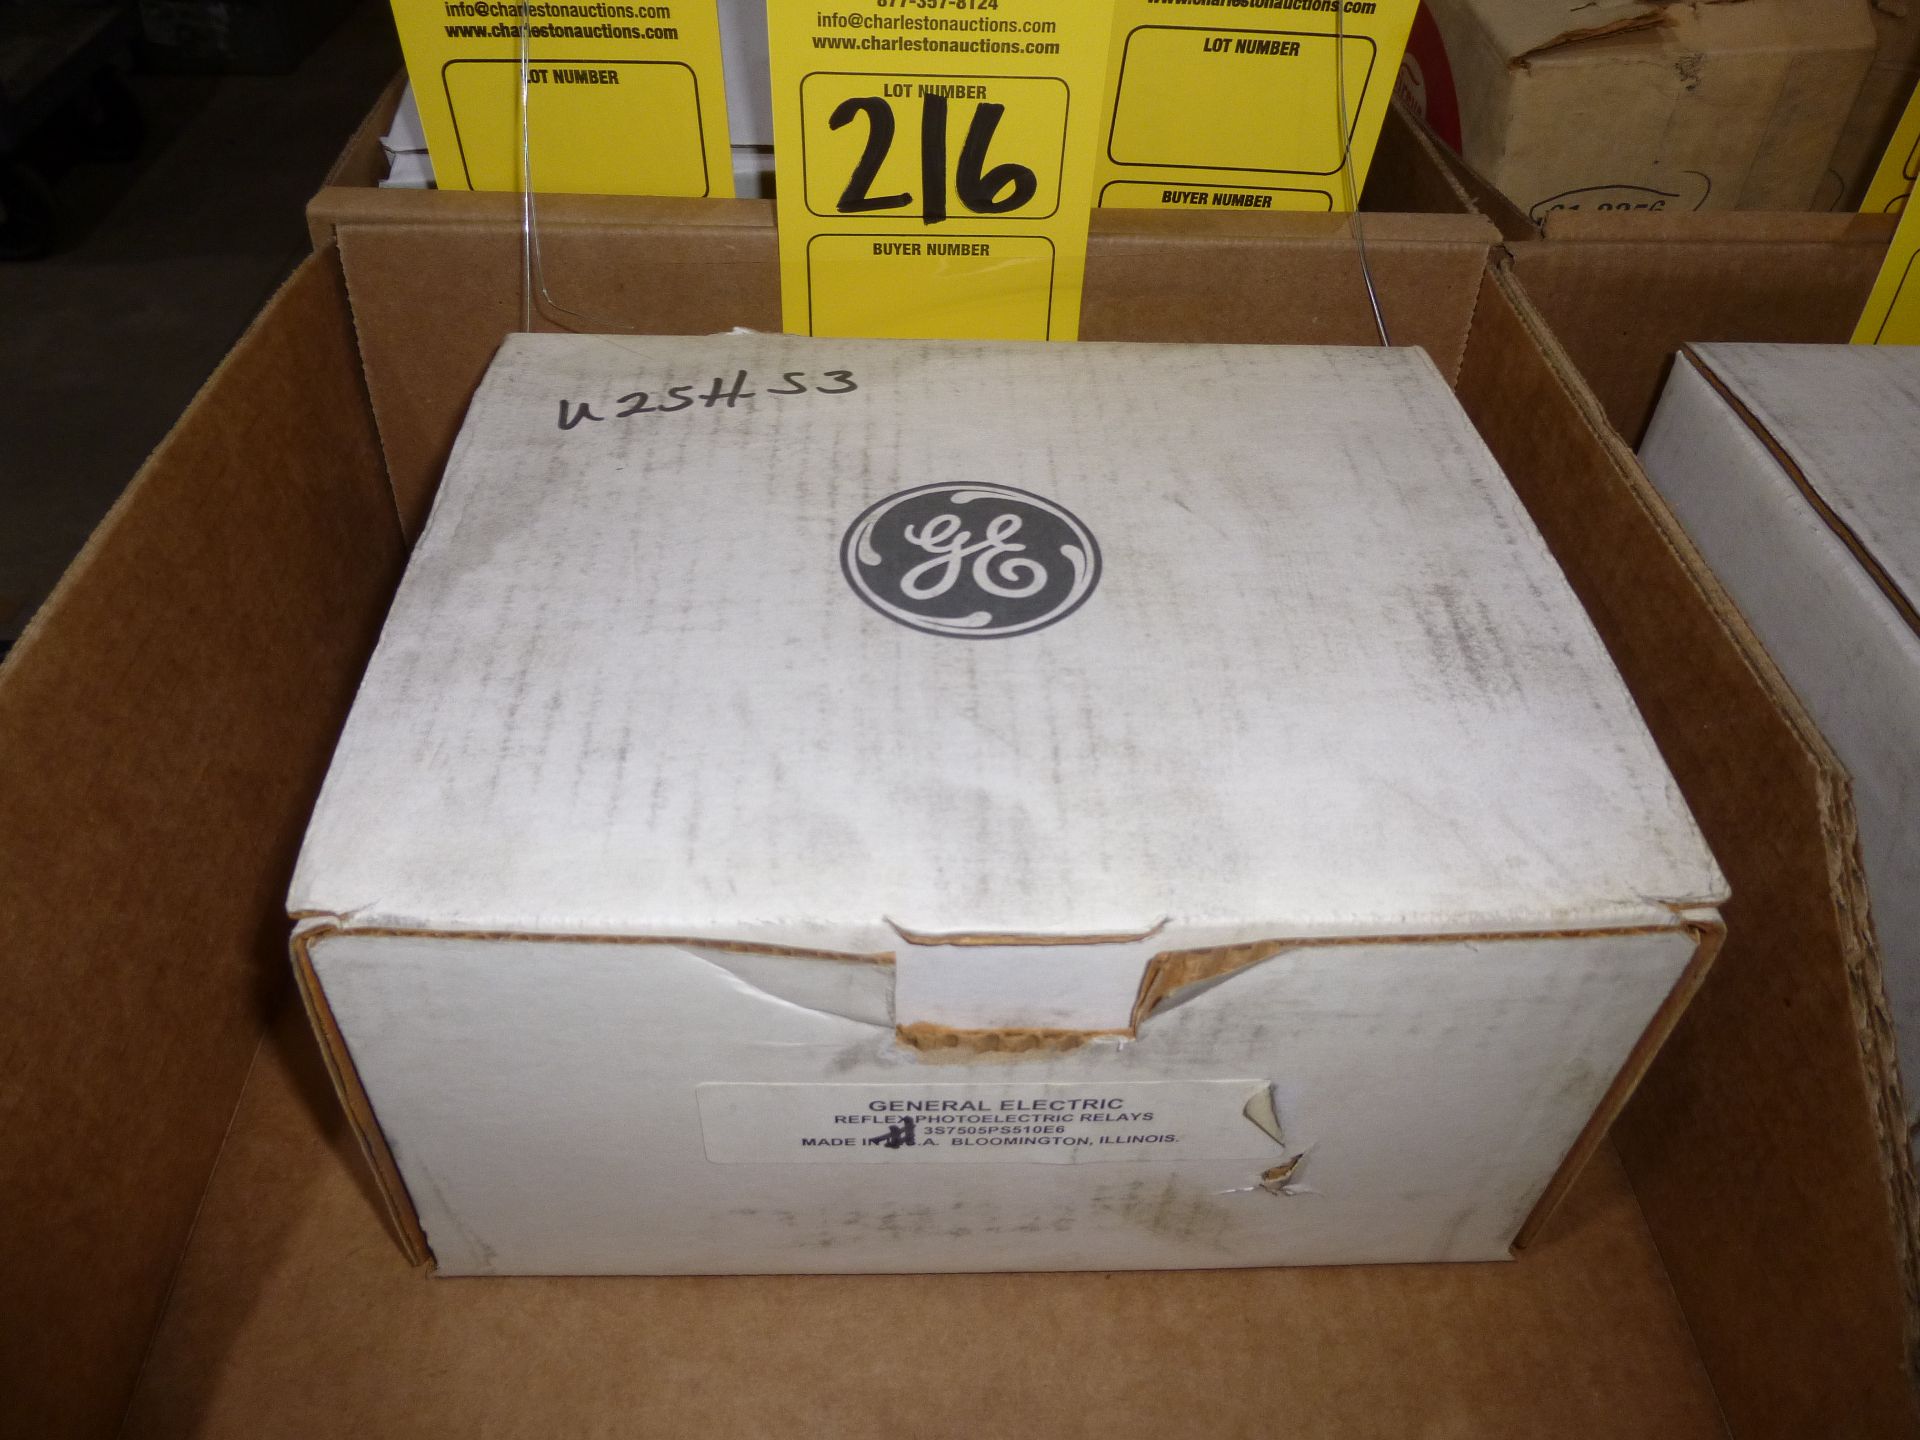 GE model 3S7505PS510E6, new in box, as always with Brolyn LLC auctions, all lots can be picked up